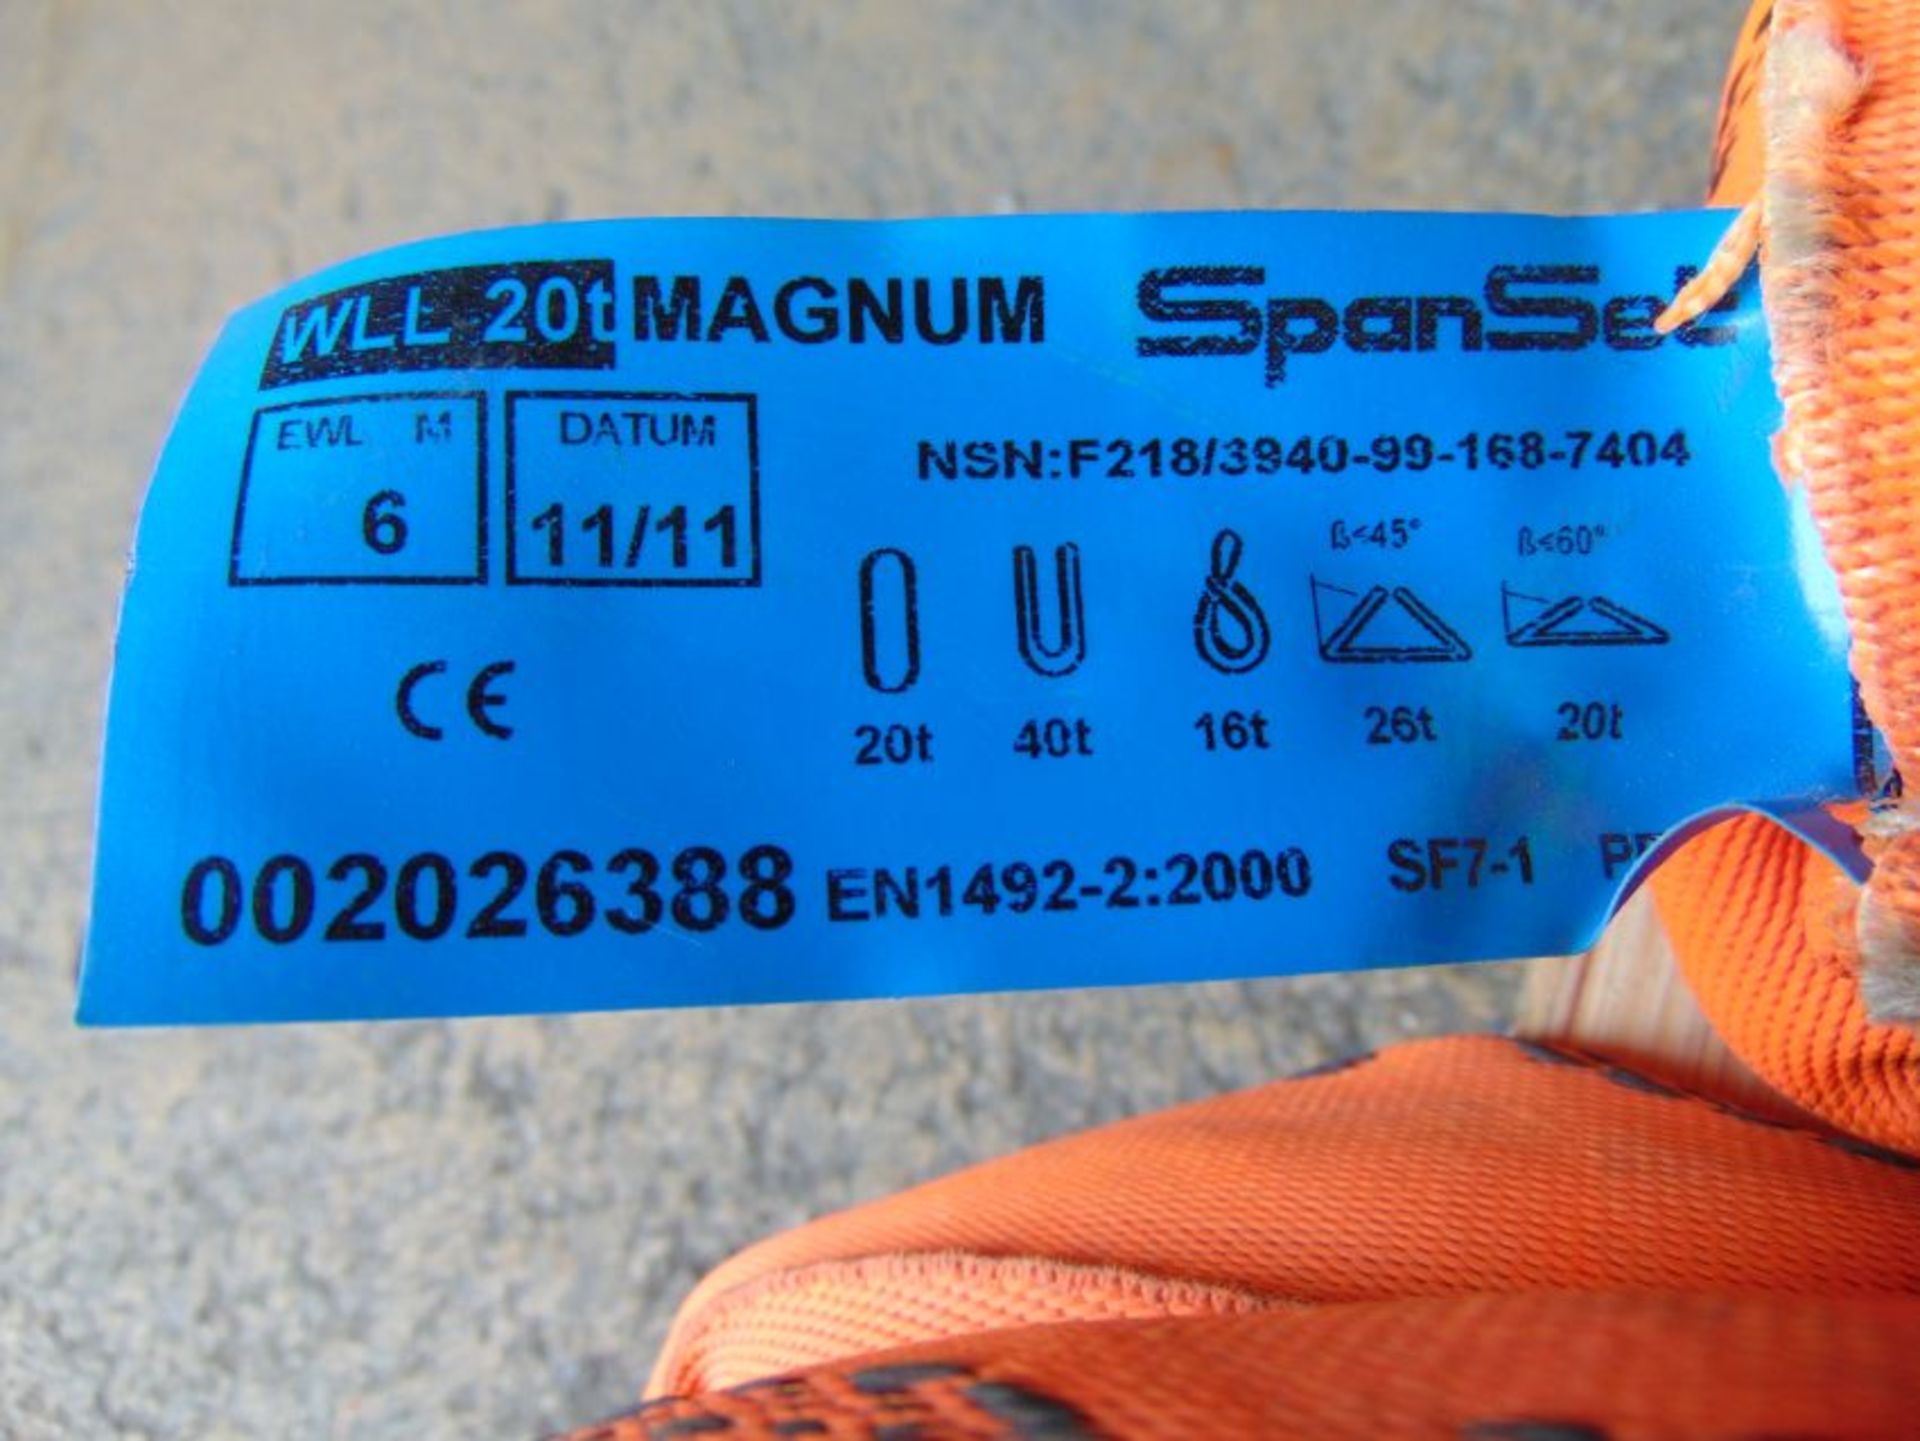 SpanSet Magnum 20,000kgs Round Sling. - Image 3 of 3